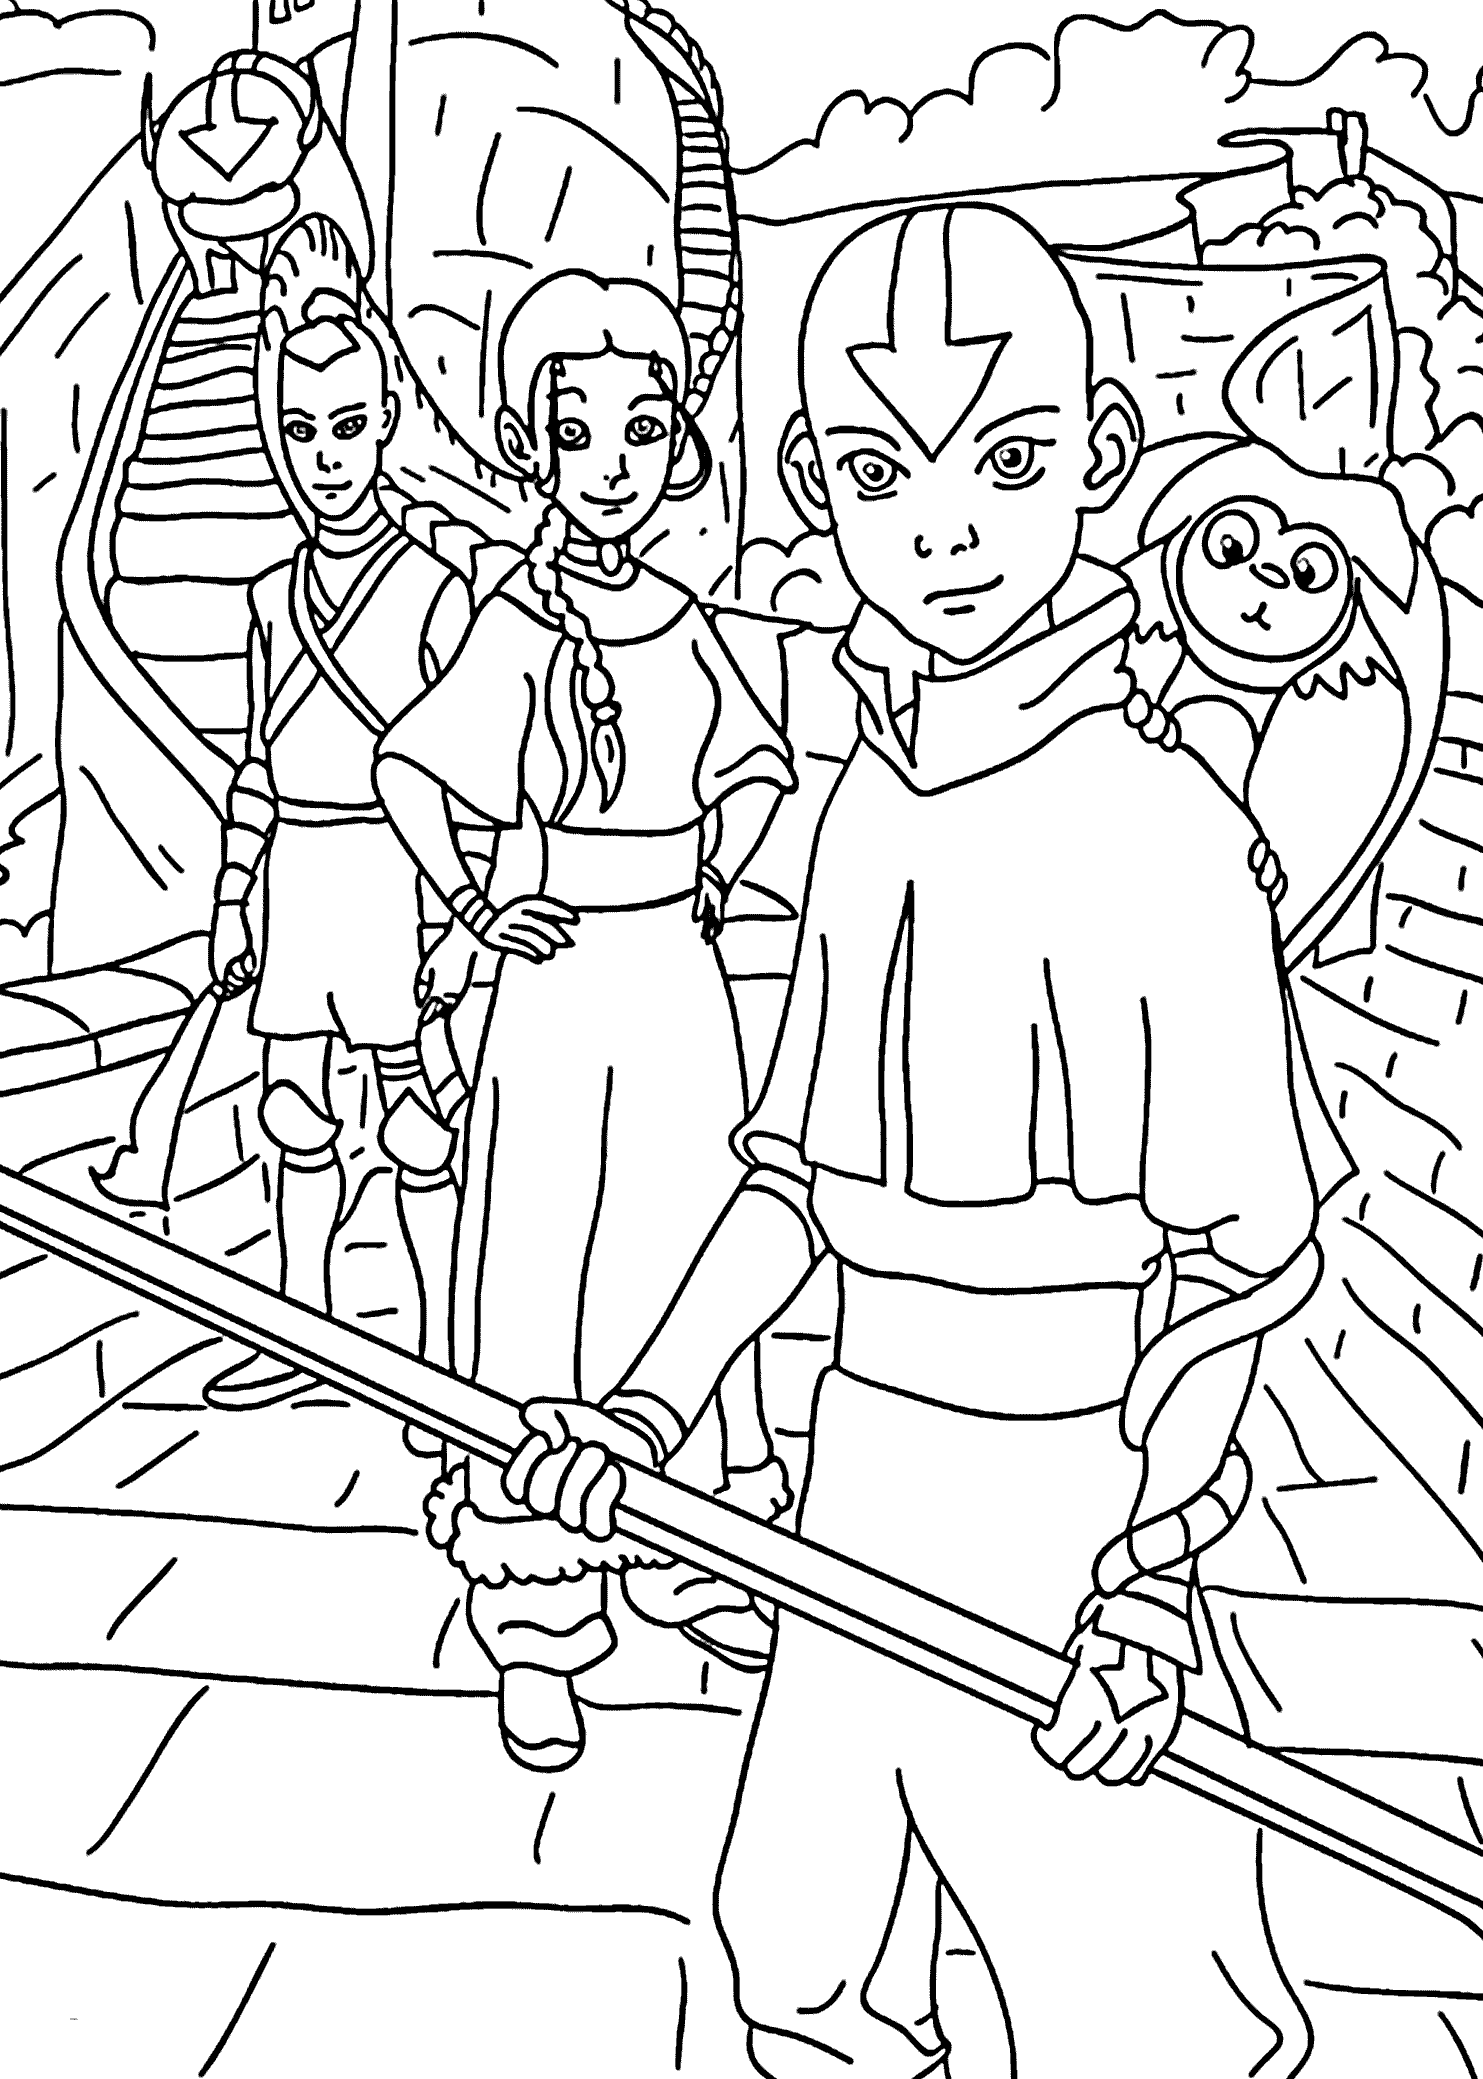 Avatar The Last Airbender Coloring Pages Free Pdf - Printable Avatar The Last Airbender Coloring Pages